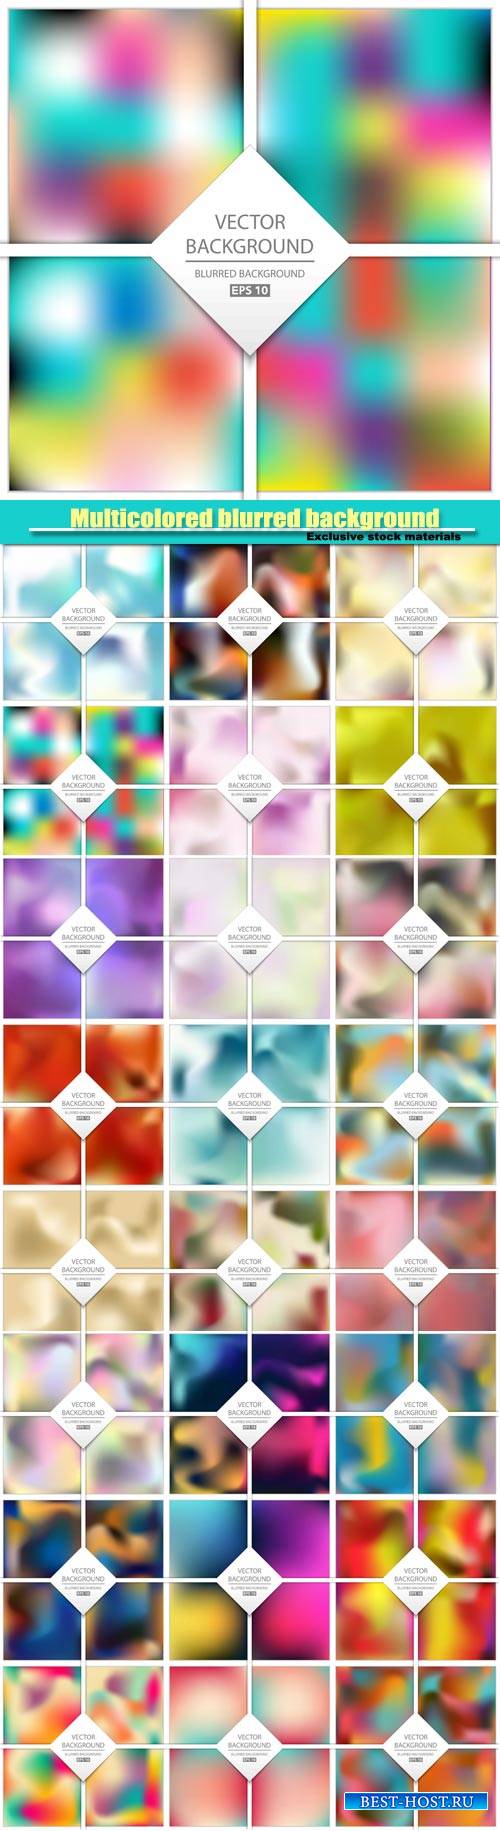 Vector abstract multicolored blurred background set